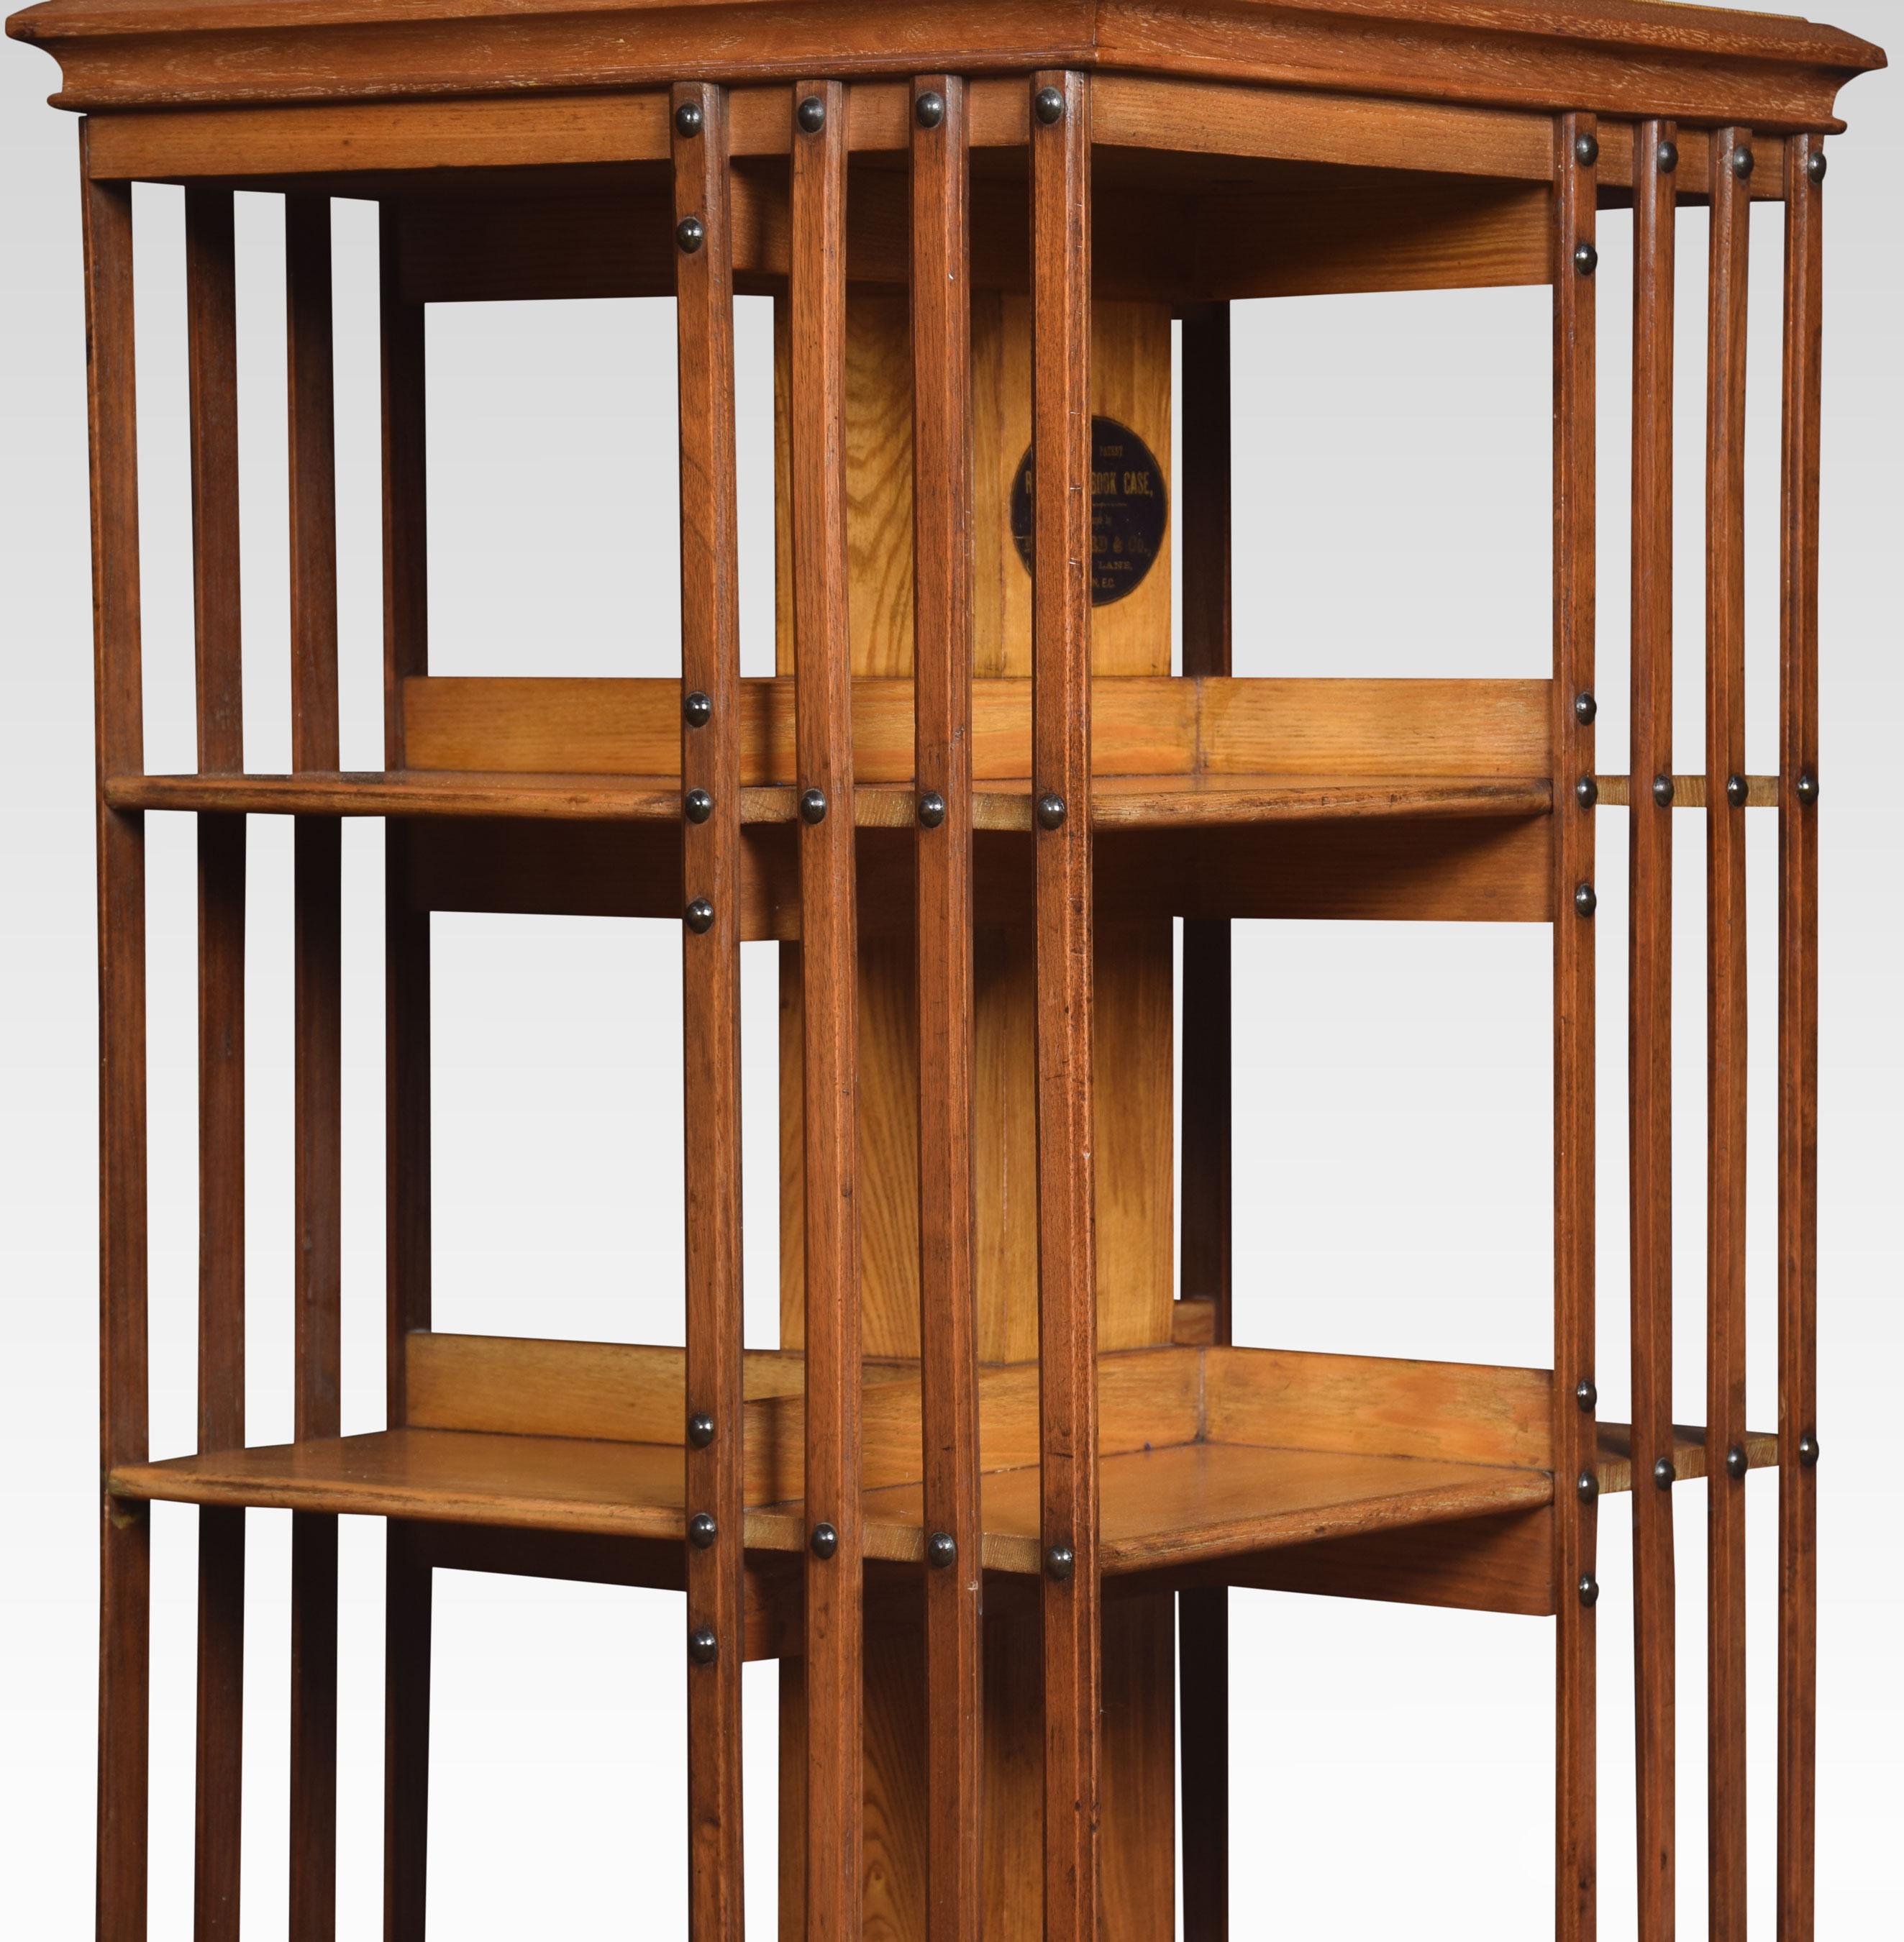 Large oak revolving bookcase the square molded top above four tiers with an arrangement of shelves raised up on cruciform base terminating in ceramic castors.
Dimensions:
Height 54 inches
Length 20 inches
Width 20 inches.